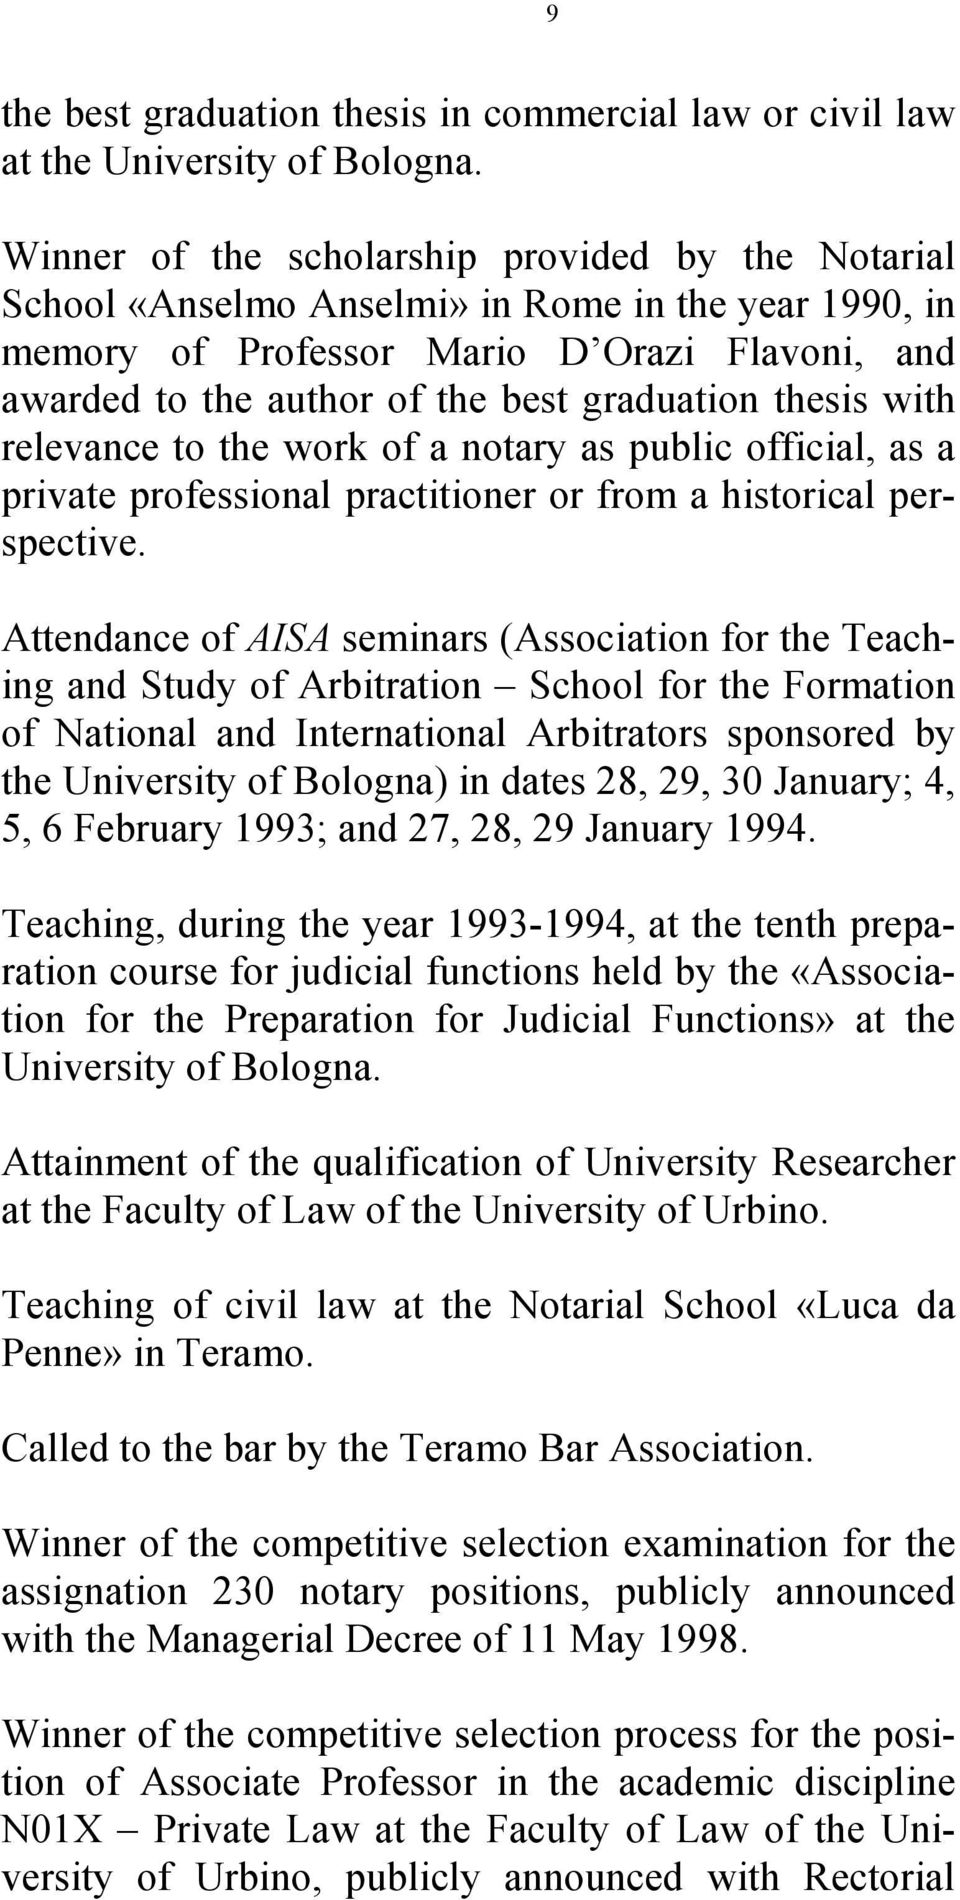 thesis with relevance to the work of a notary as public official, as a private professional practitioner or from a historical perspective.